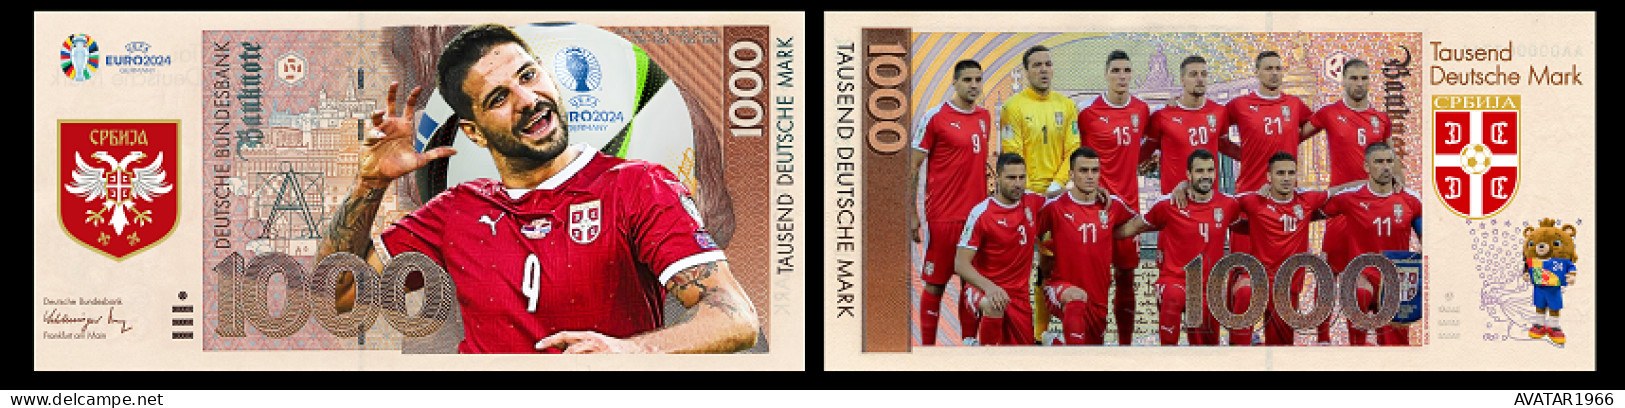 UEFA European Football Championship 2024 qualified country Serbia  8 pieces Germany fantasy paper money